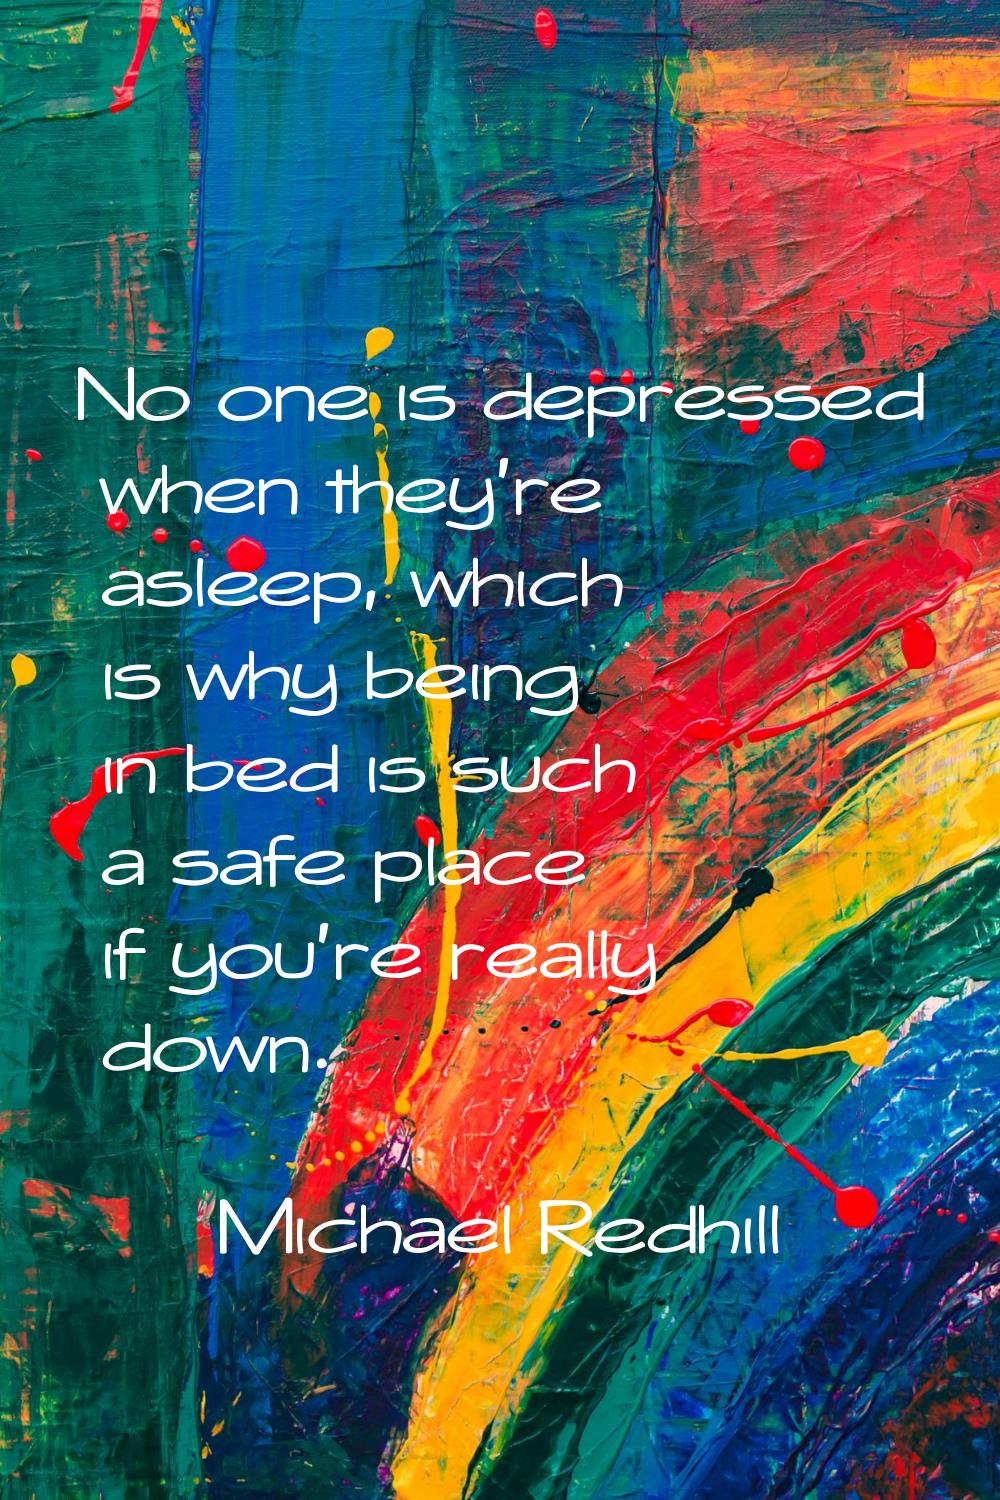 No one is depressed when they're asleep, which is why being in bed is such a safe place if you're r